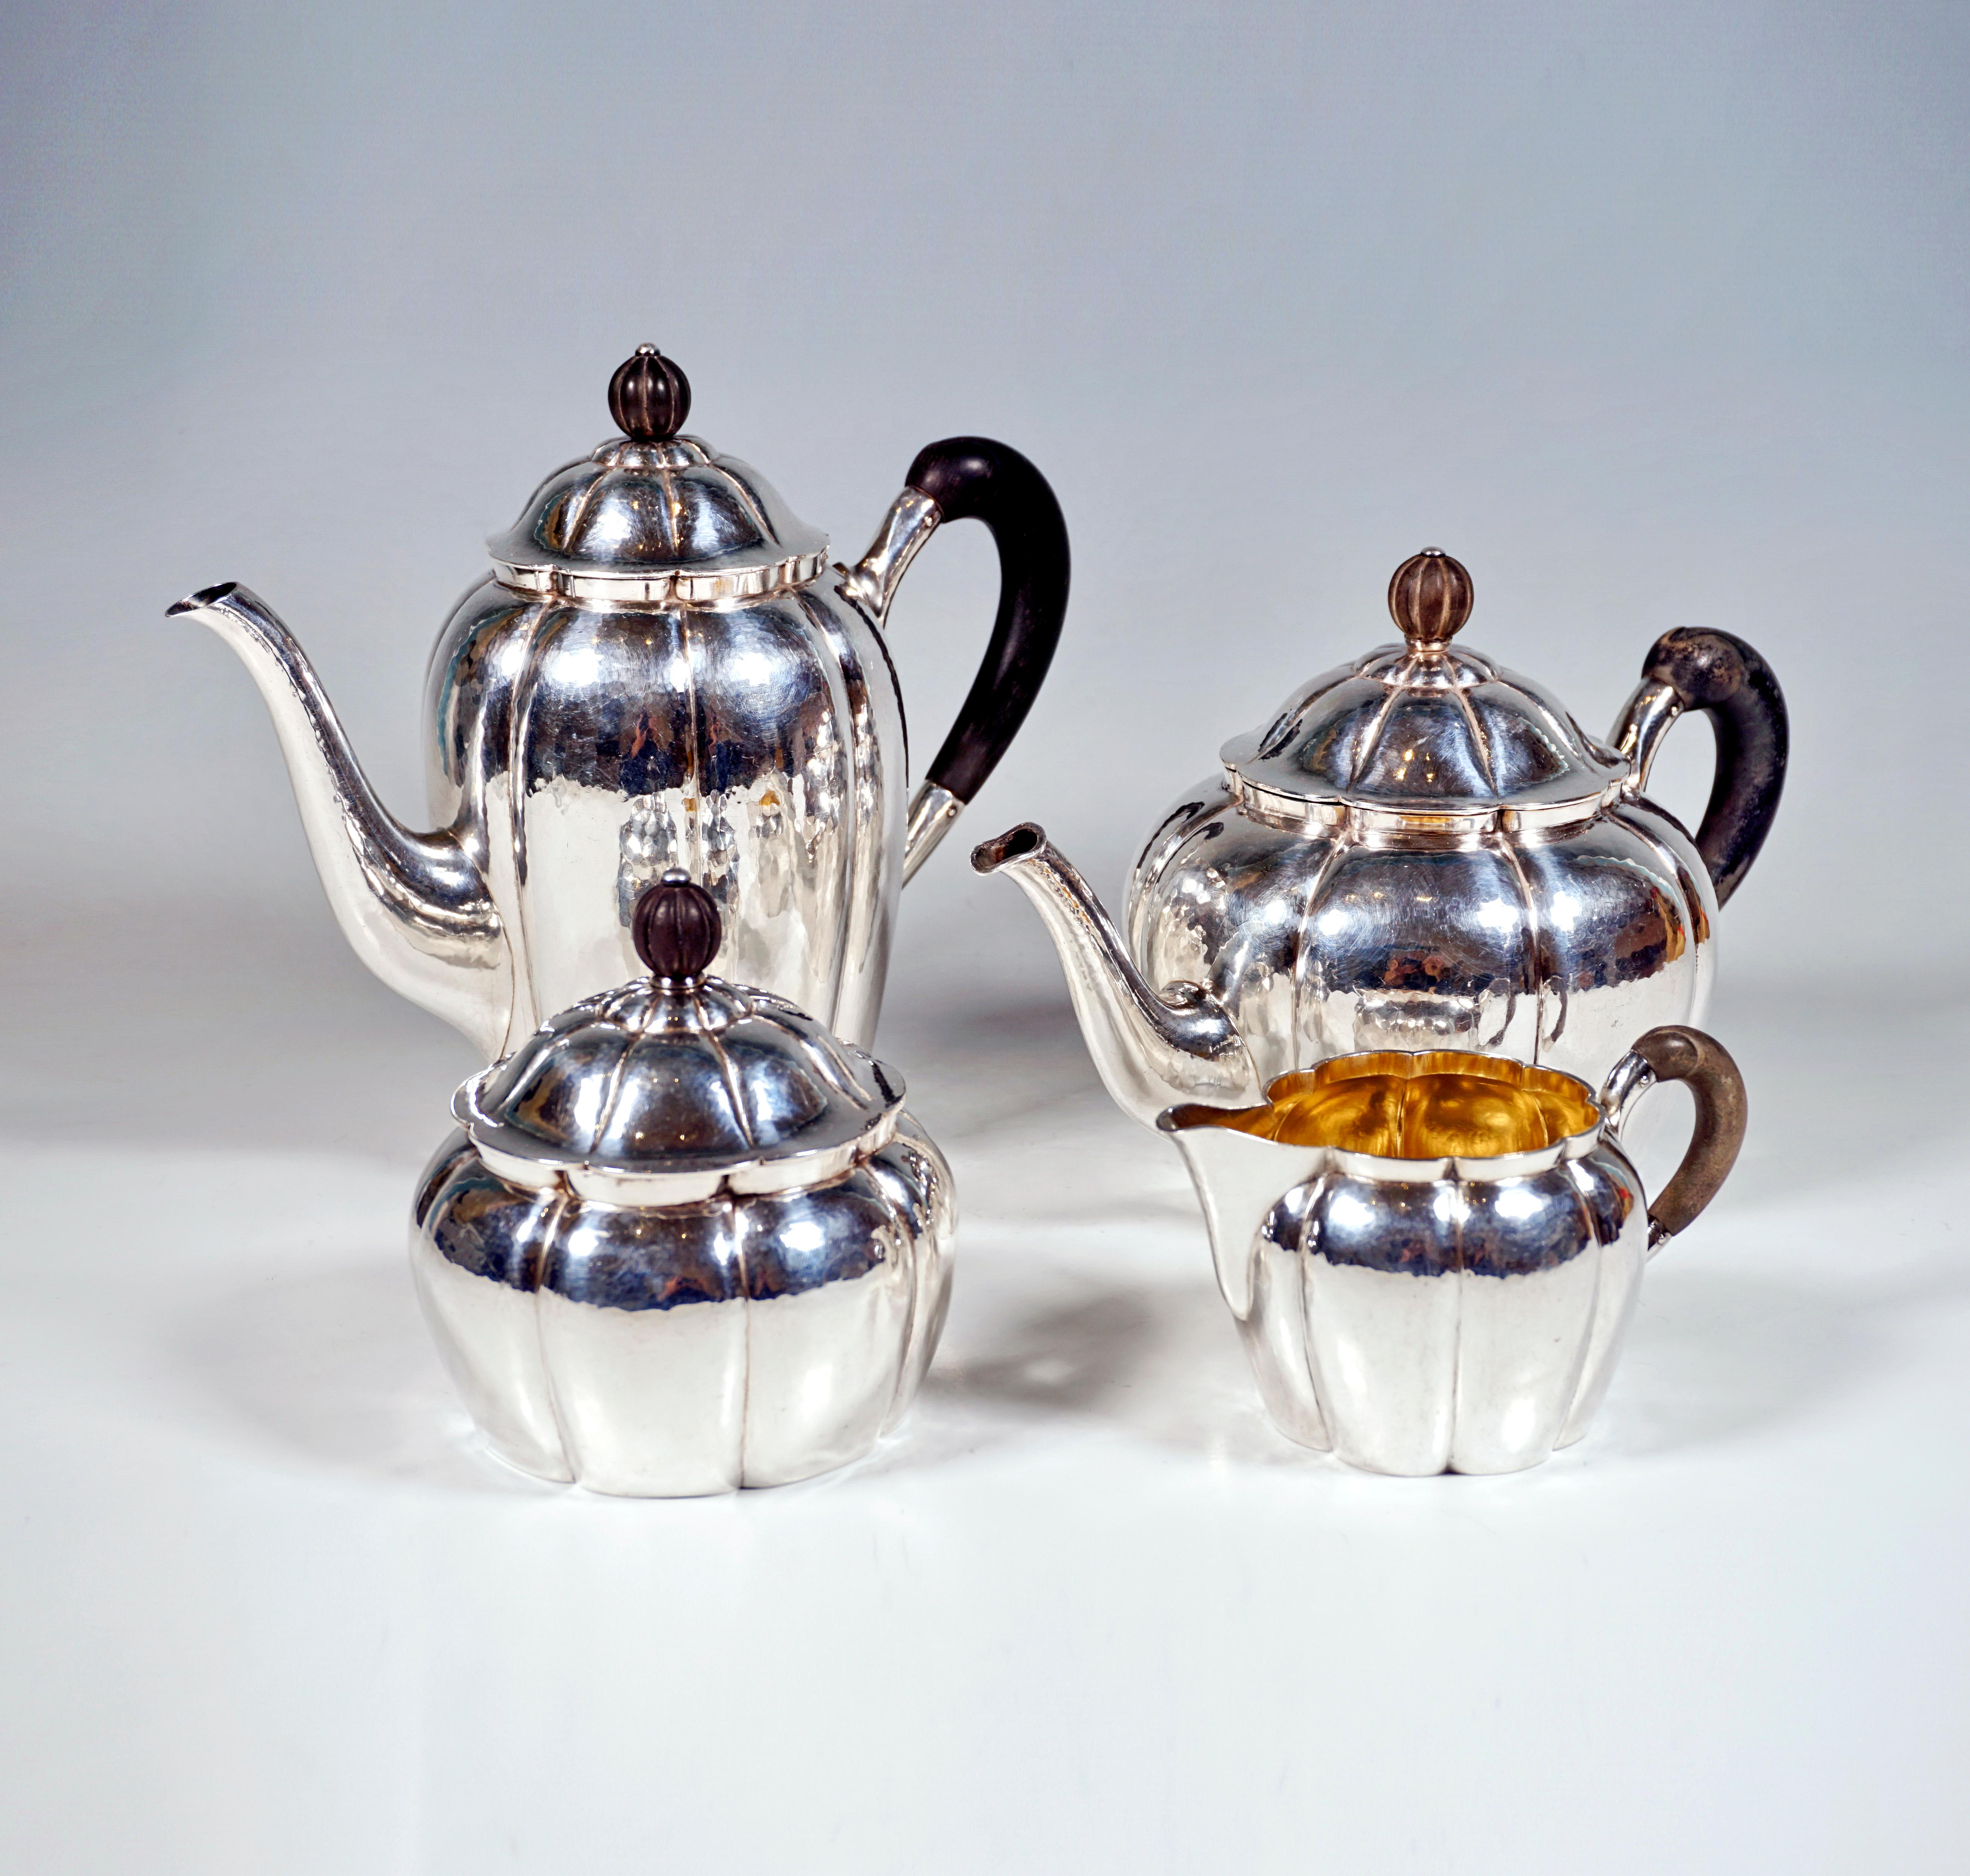 Hand-Crafted Art Déco Silver 5-Piece Coffee & Tea Set with Tray, Around 1920 For Sale